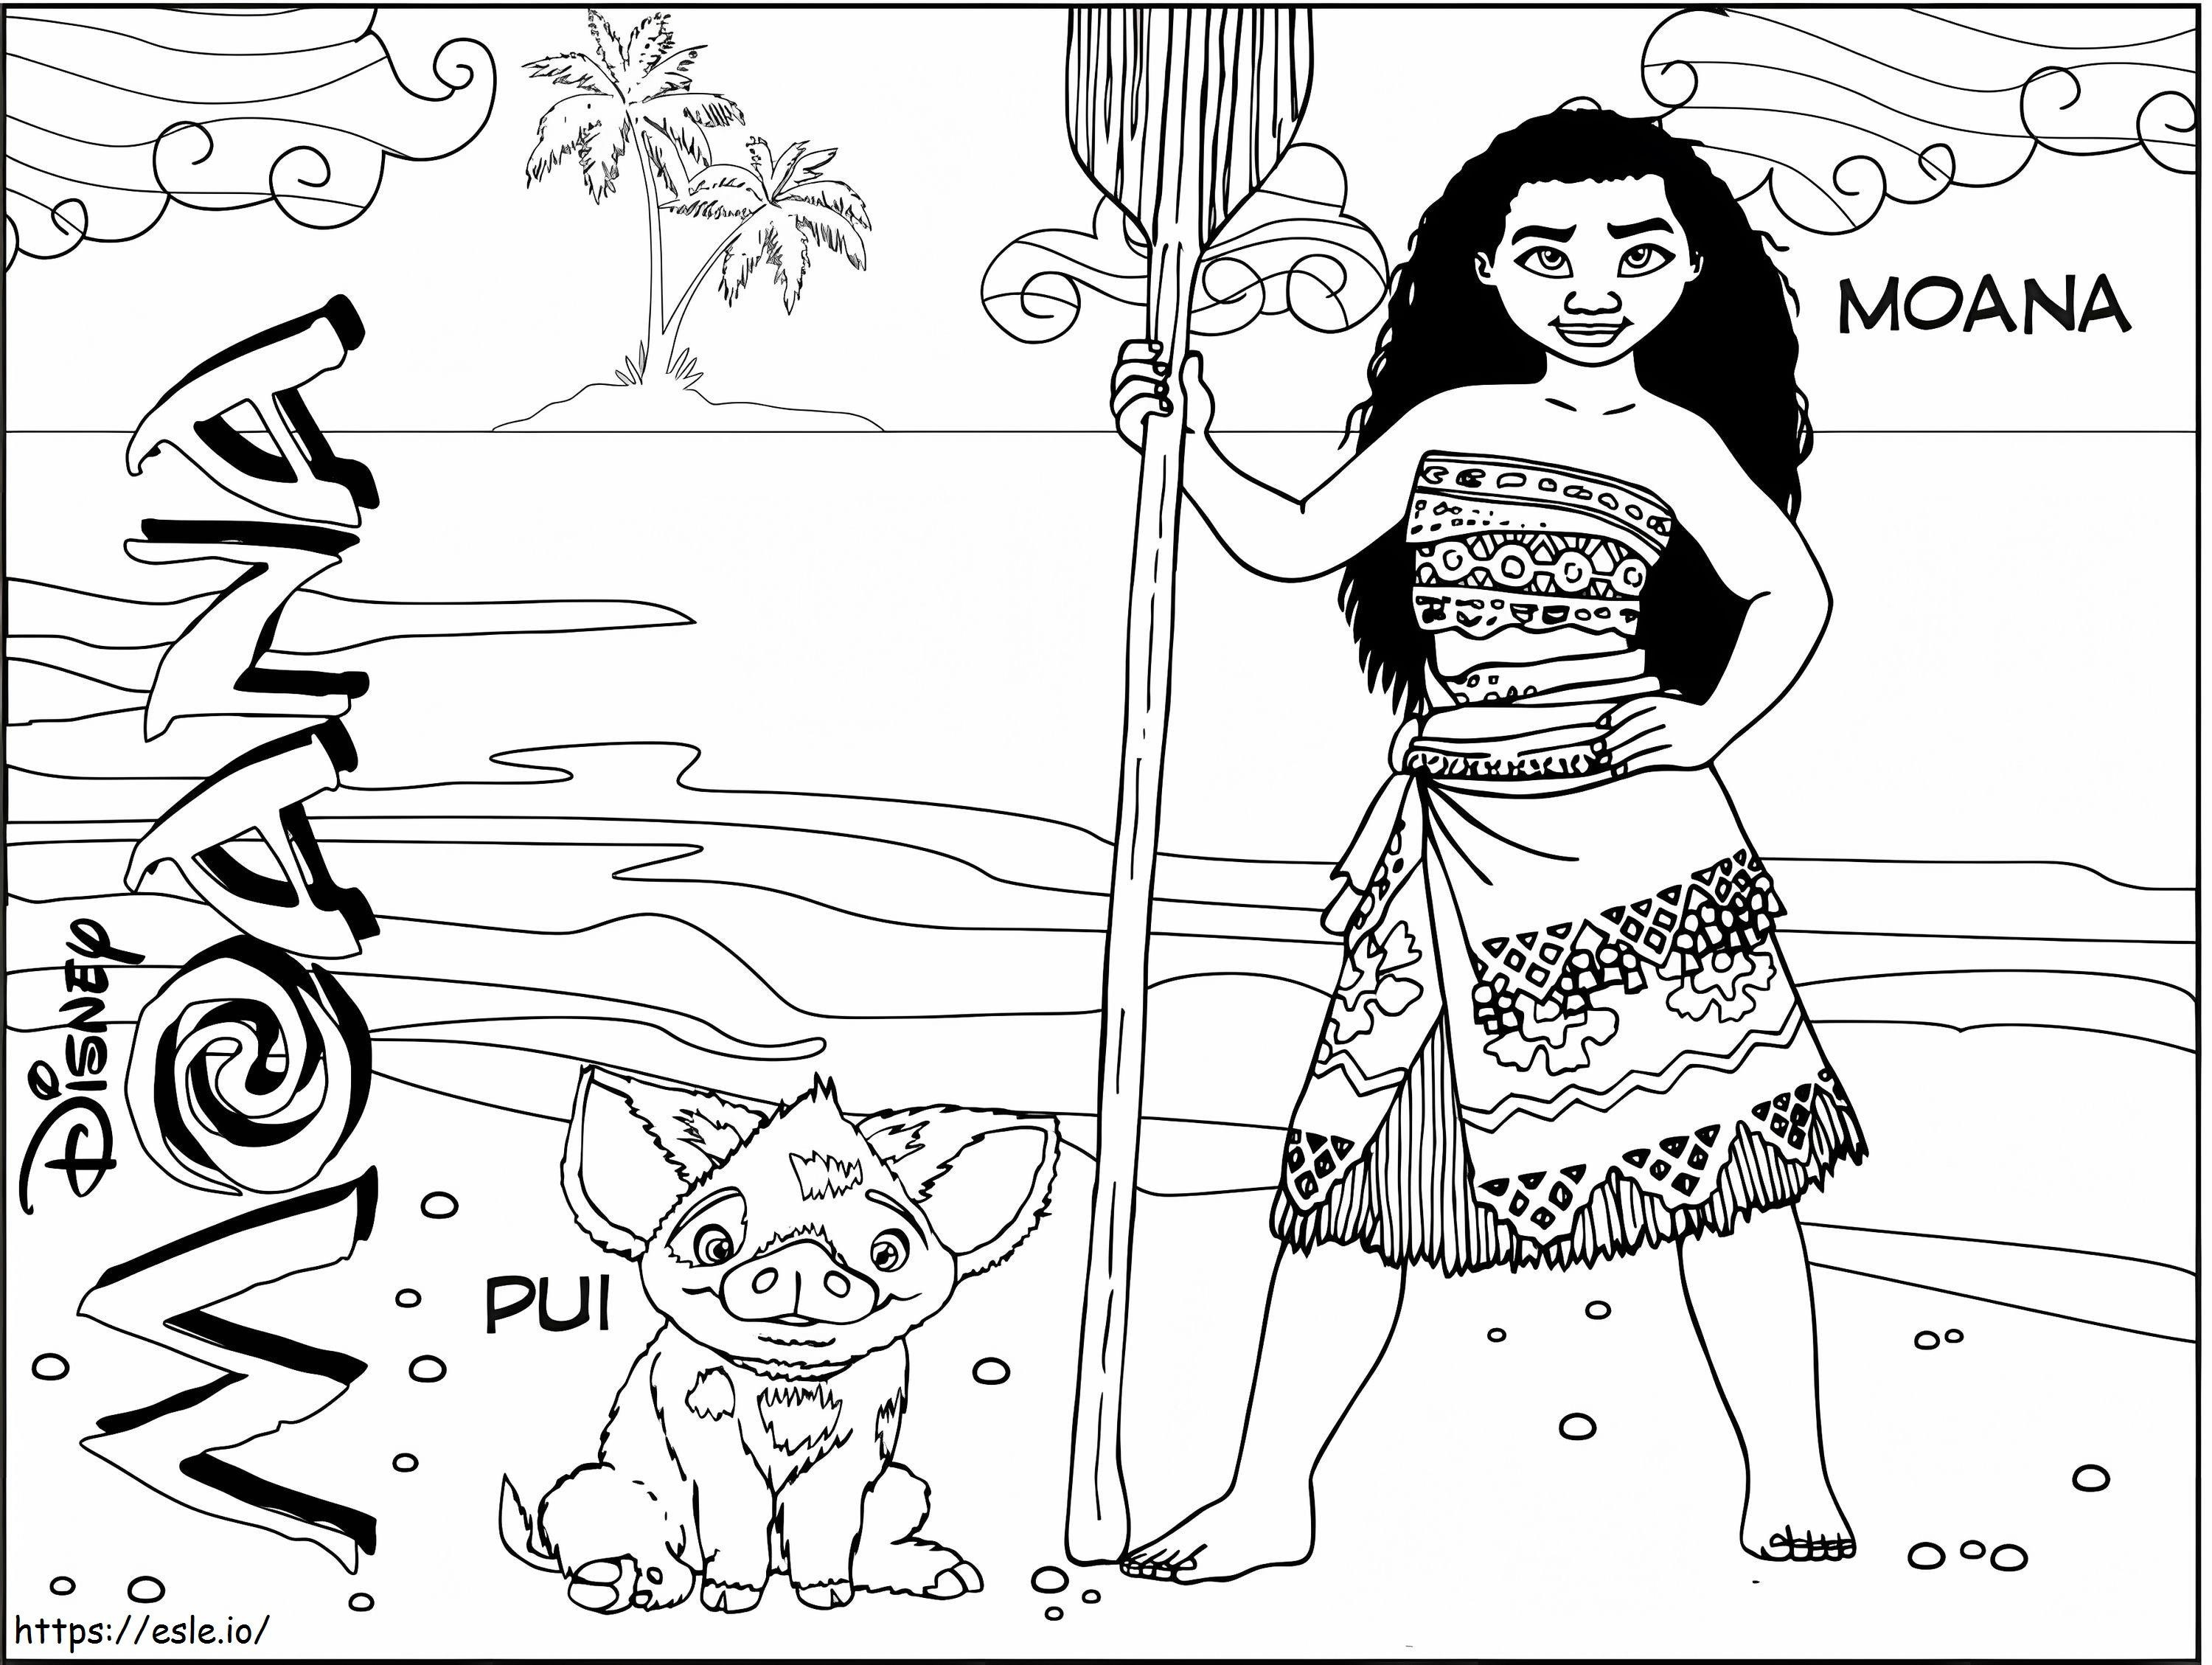 Pua Pig And Moana coloring page